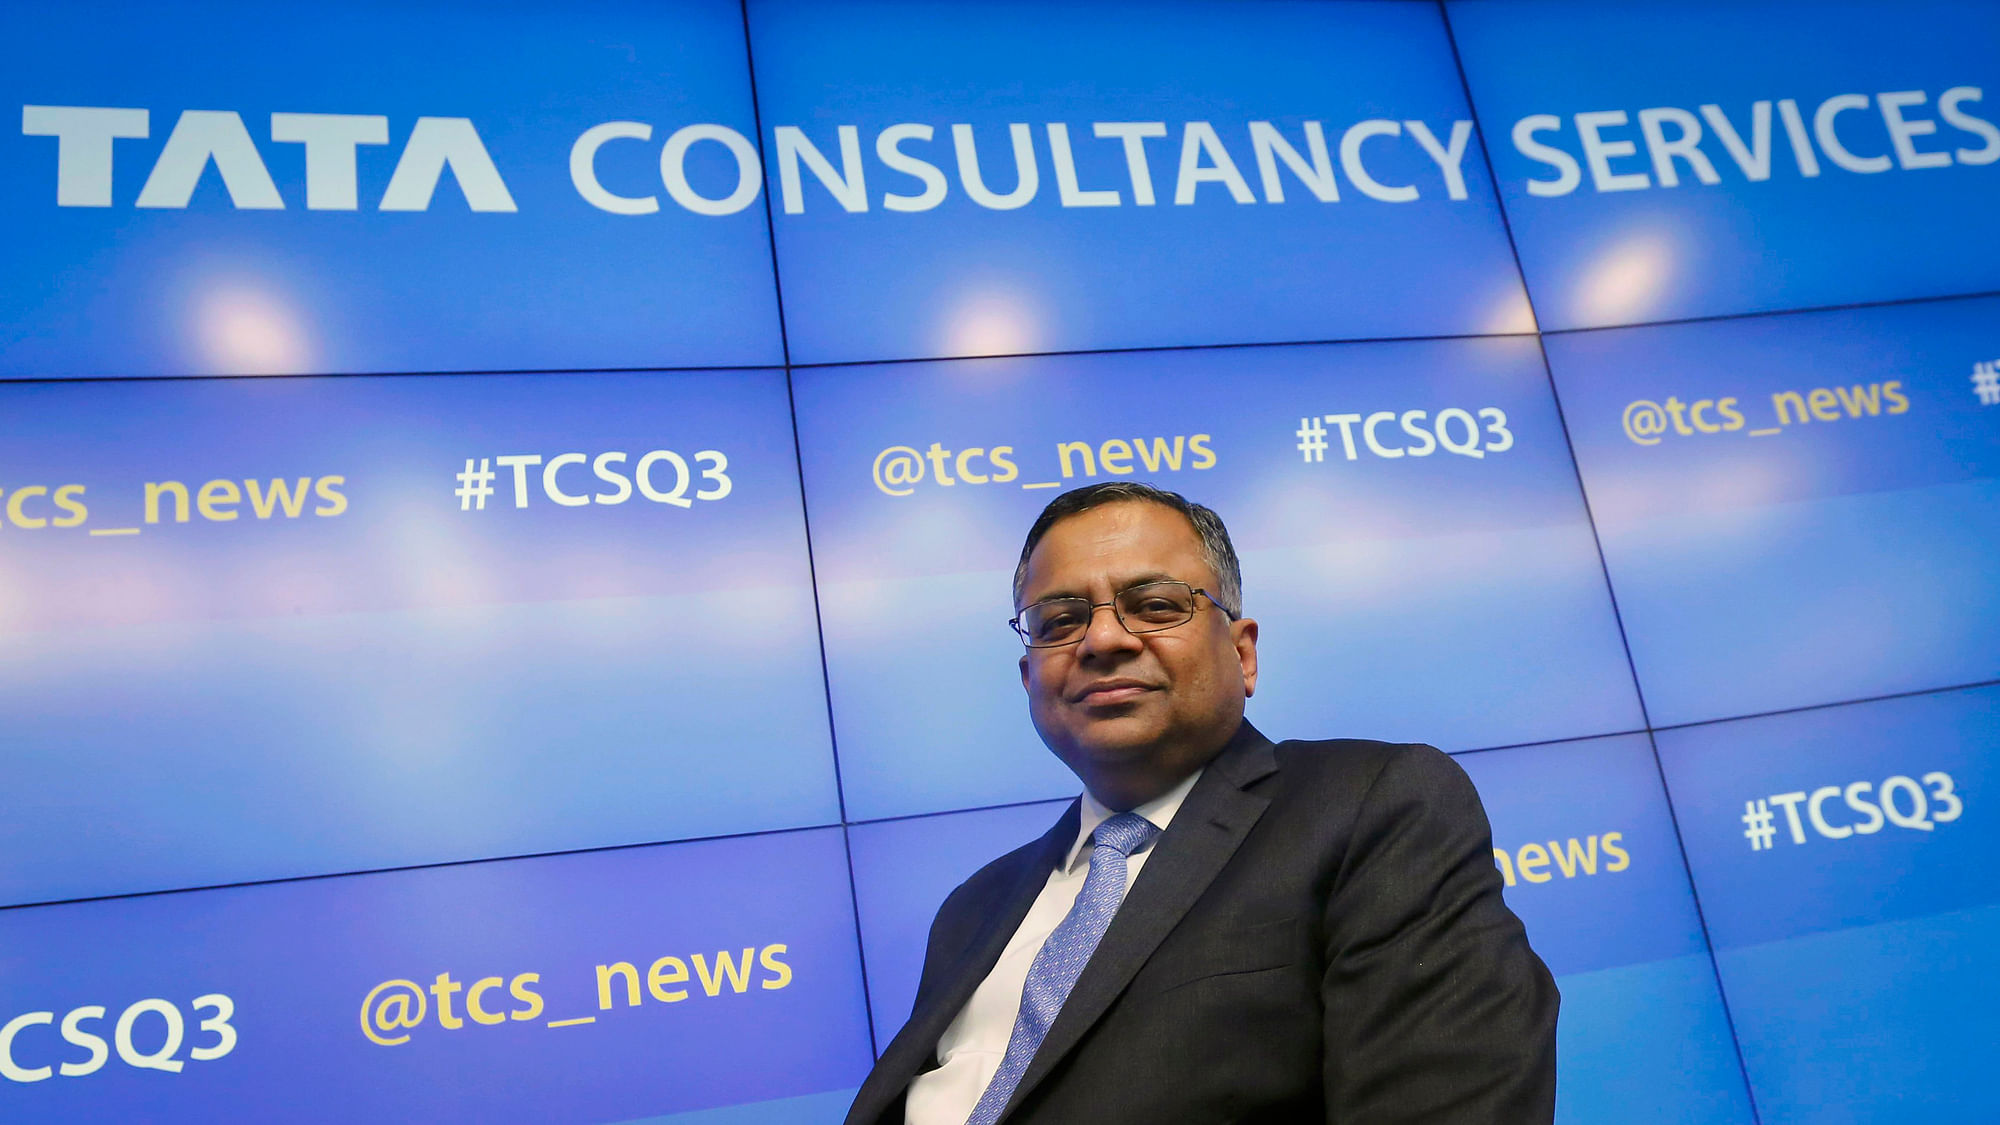 File photo of Tata Consultancy Services Chief Executive N Chandrasekaran. (Photo: Reuters)